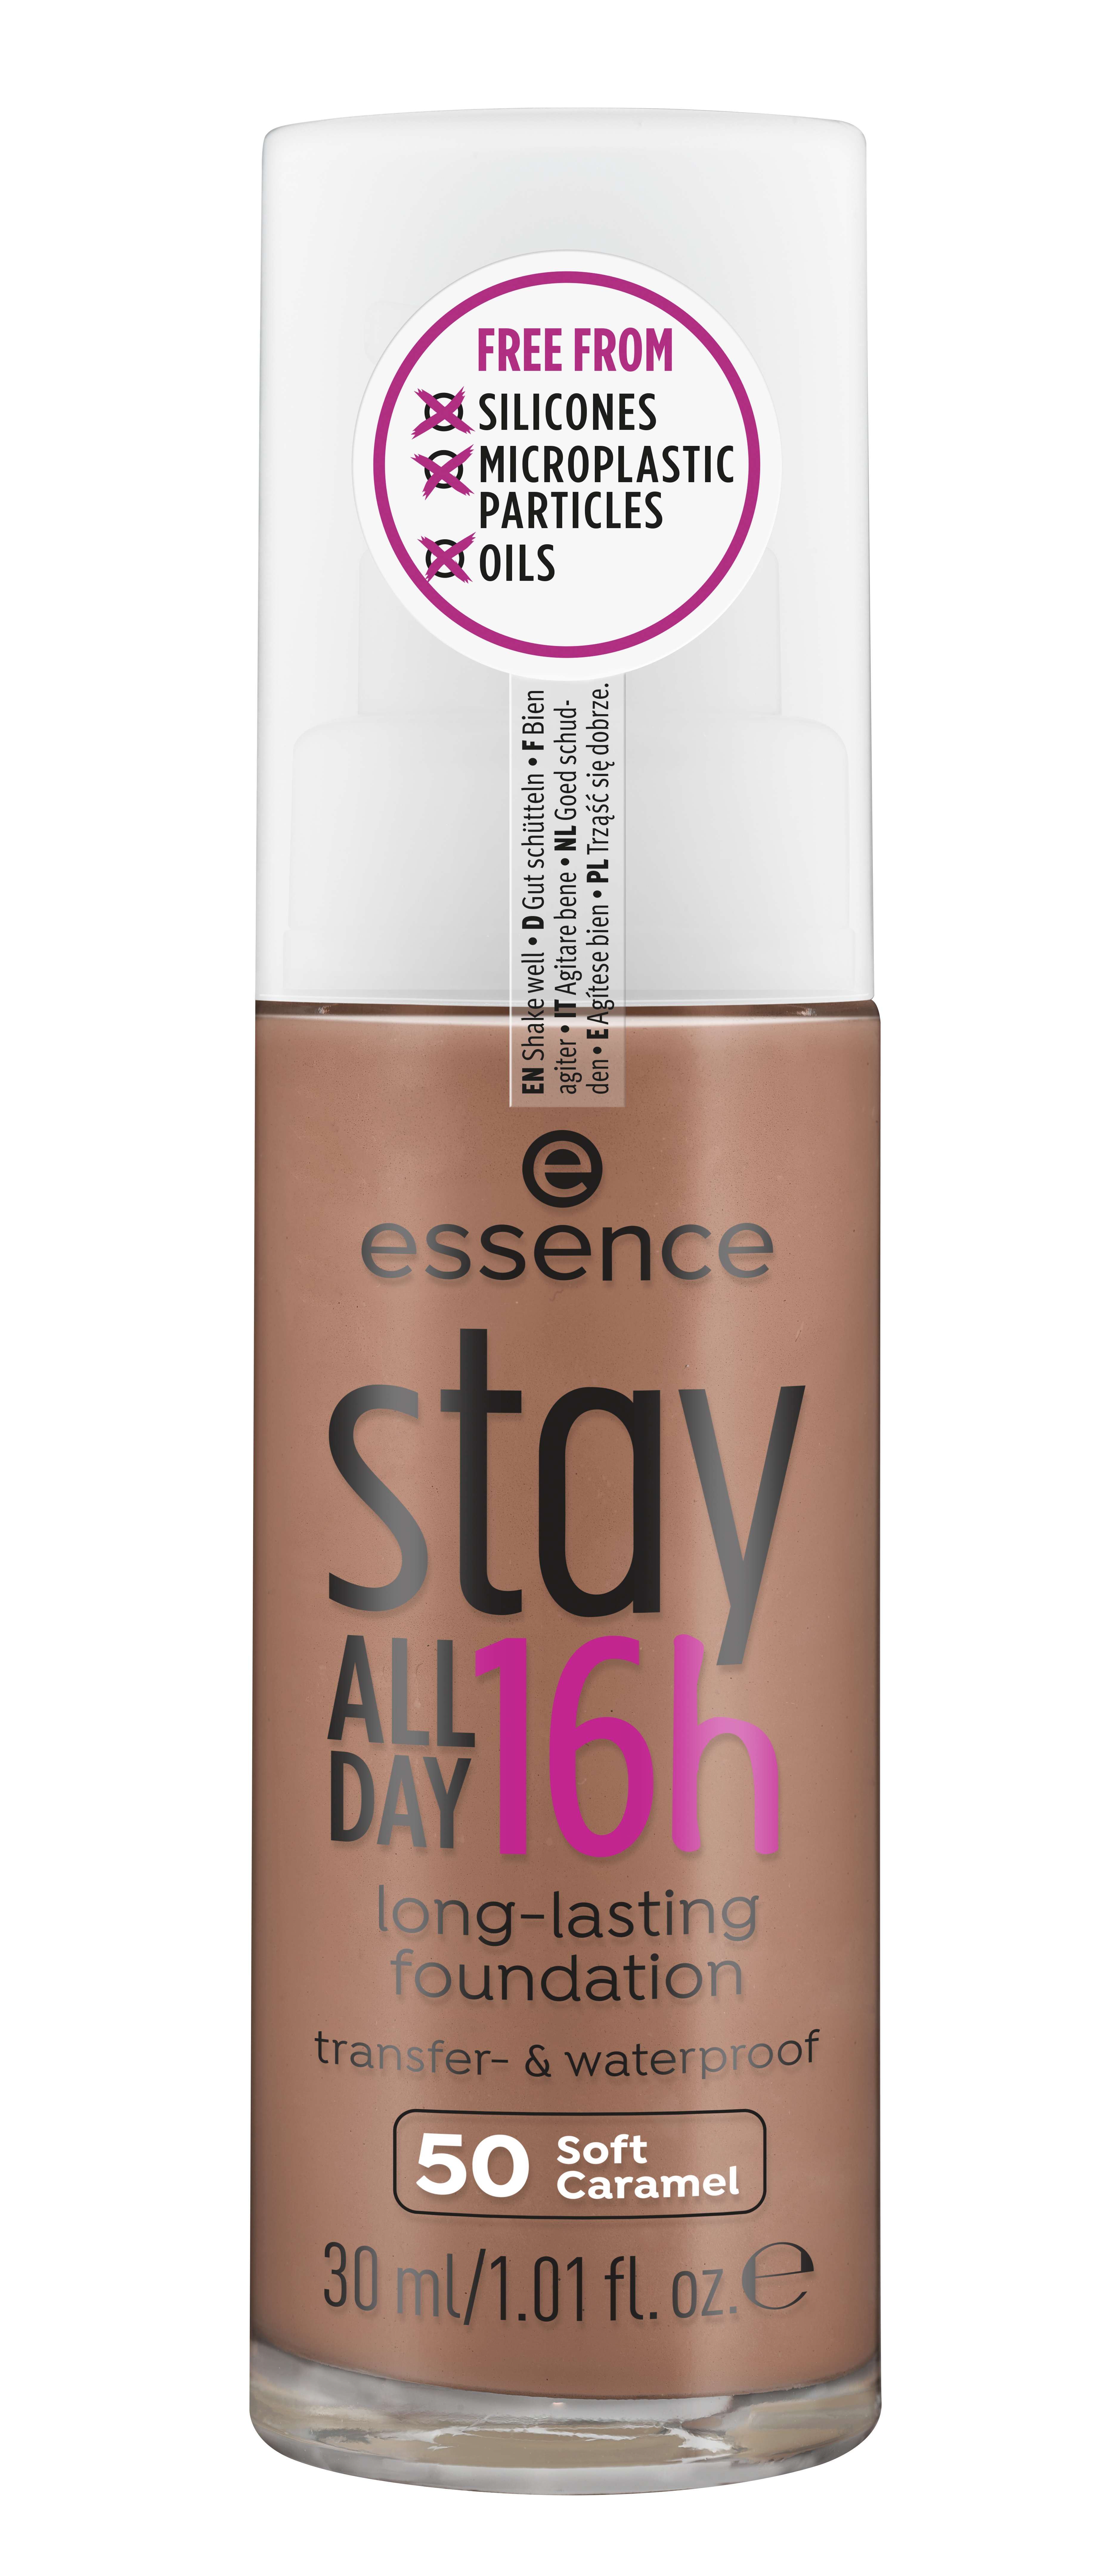 foundation essence all 16h Sand stay Soft long-lasting day 30